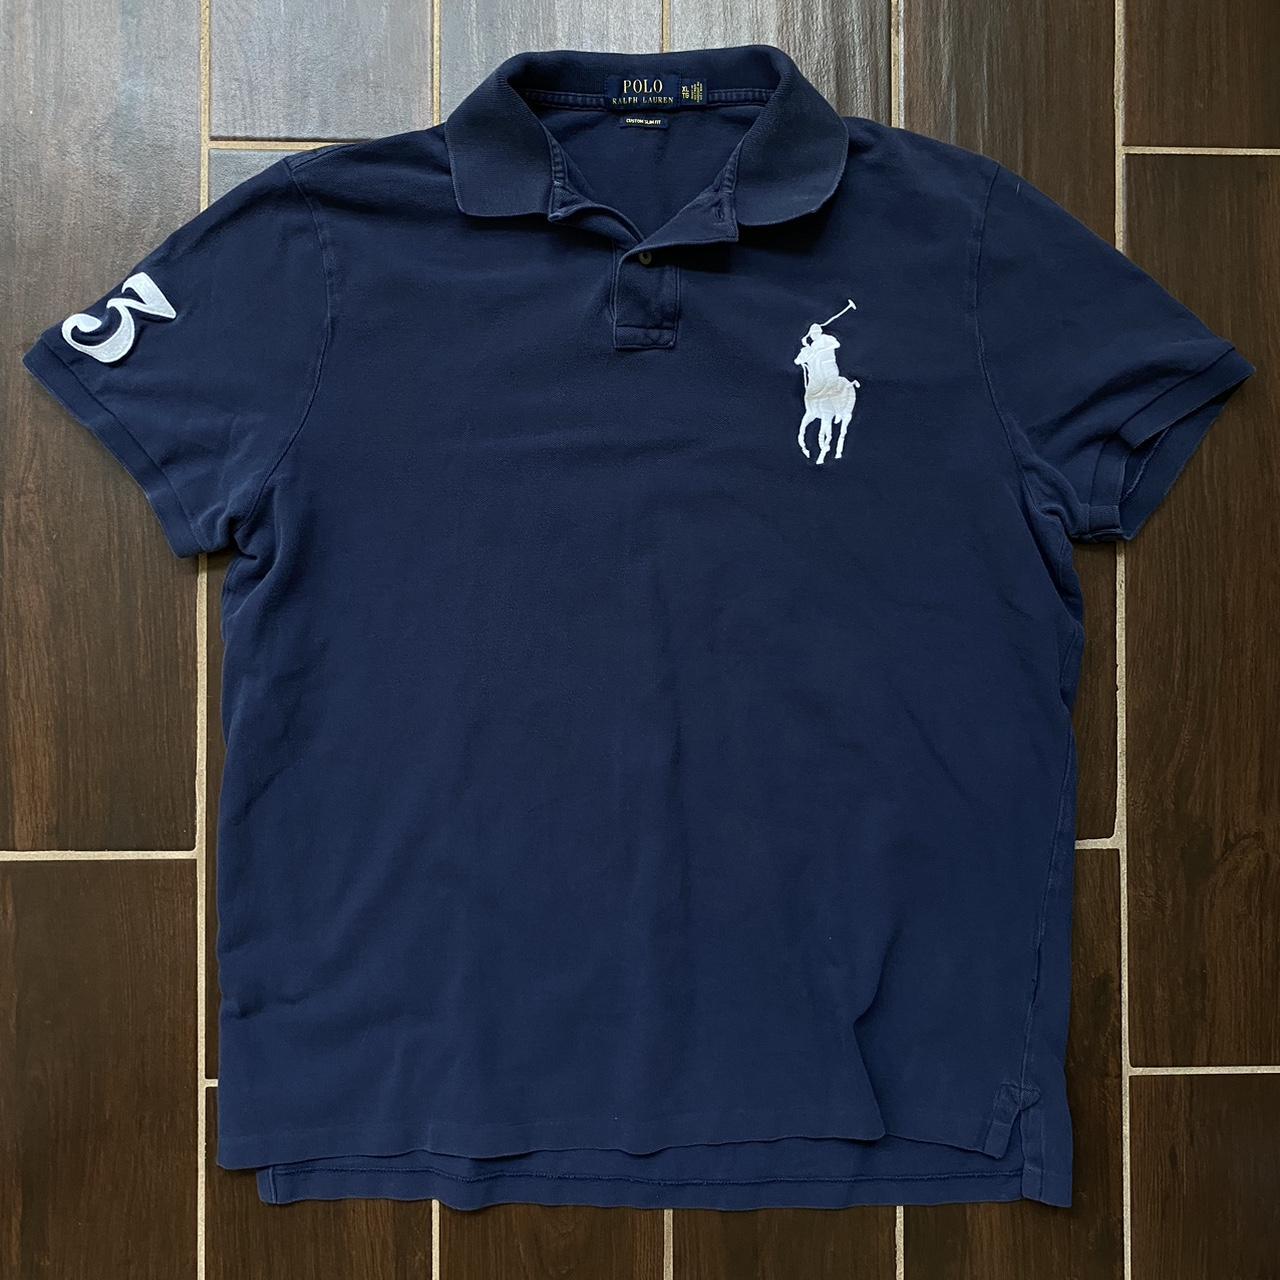 Polo Ralph Lauren navy blue and white #3 Big pony... - Depop